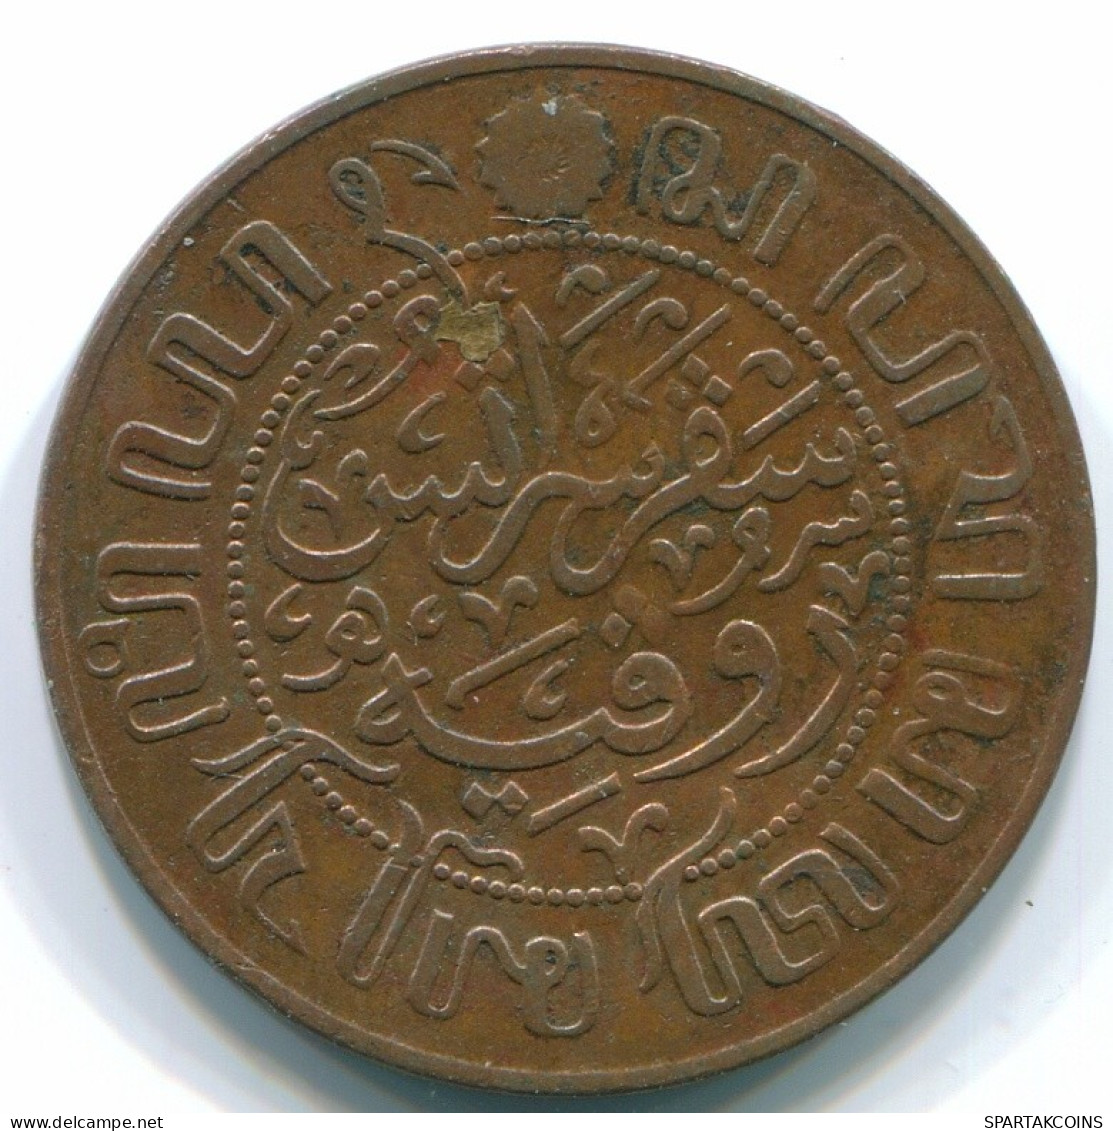 1 CENT 1929 NETHERLANDS EAST INDIES INDONESIA Copper Colonial Coin #S10110.U.A - Indie Olandesi